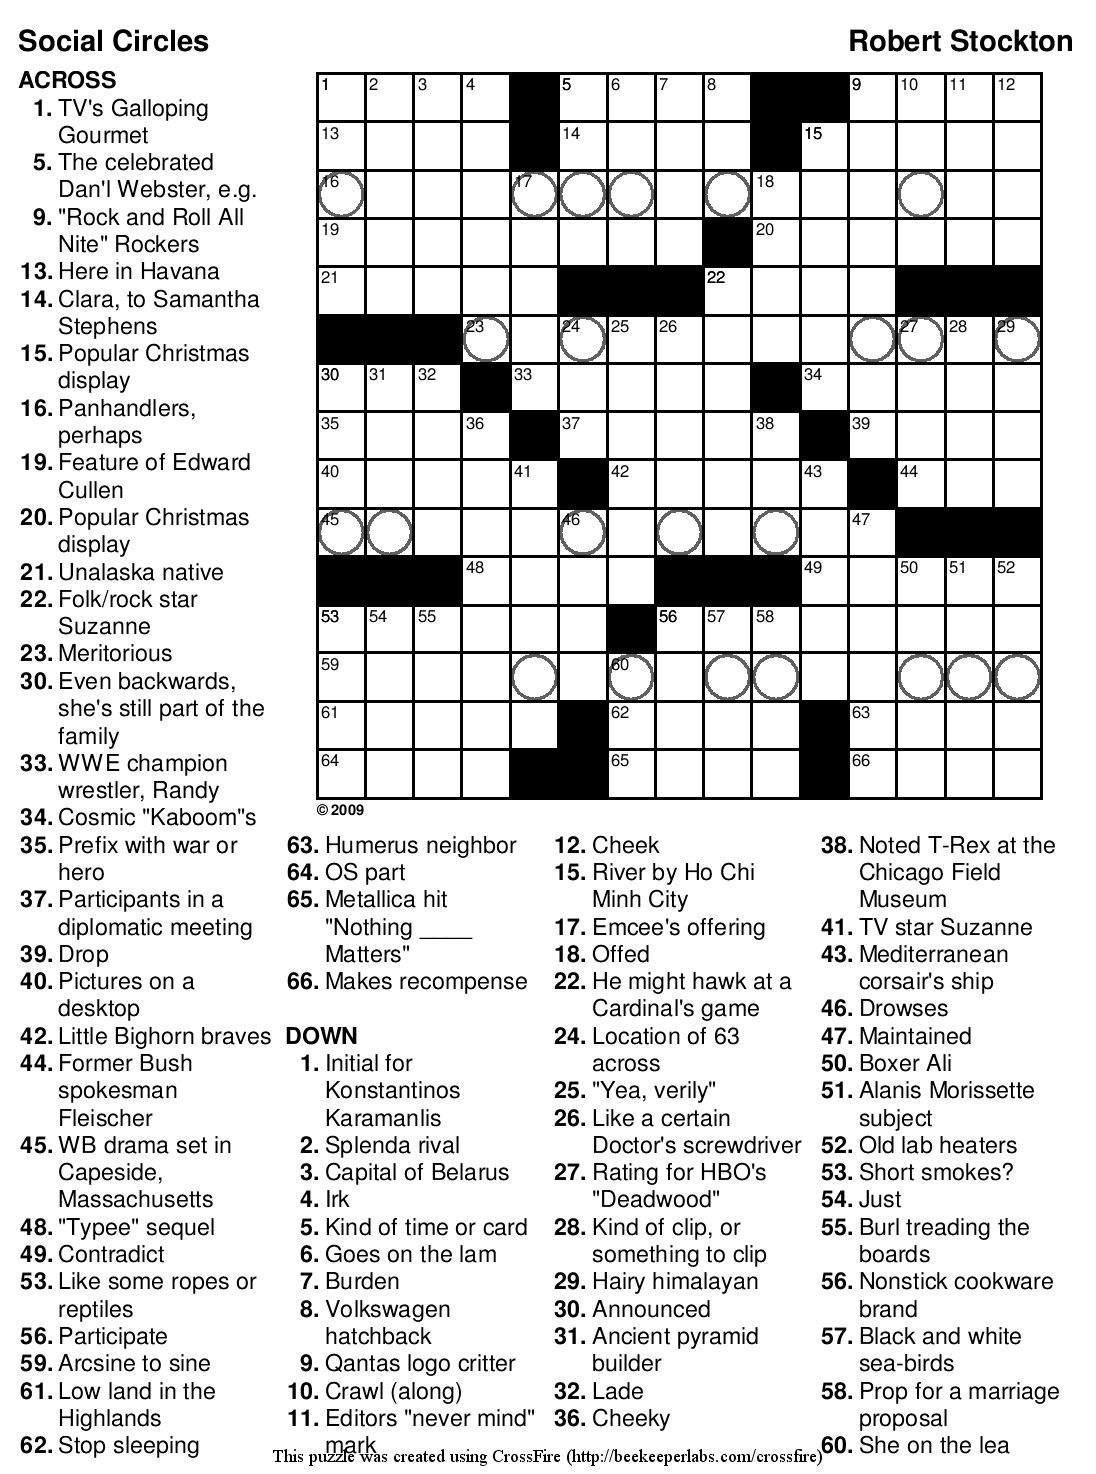 Crossword Puzzles Printable - Yahoo Image Search Results | Crossword - Printable Crossword